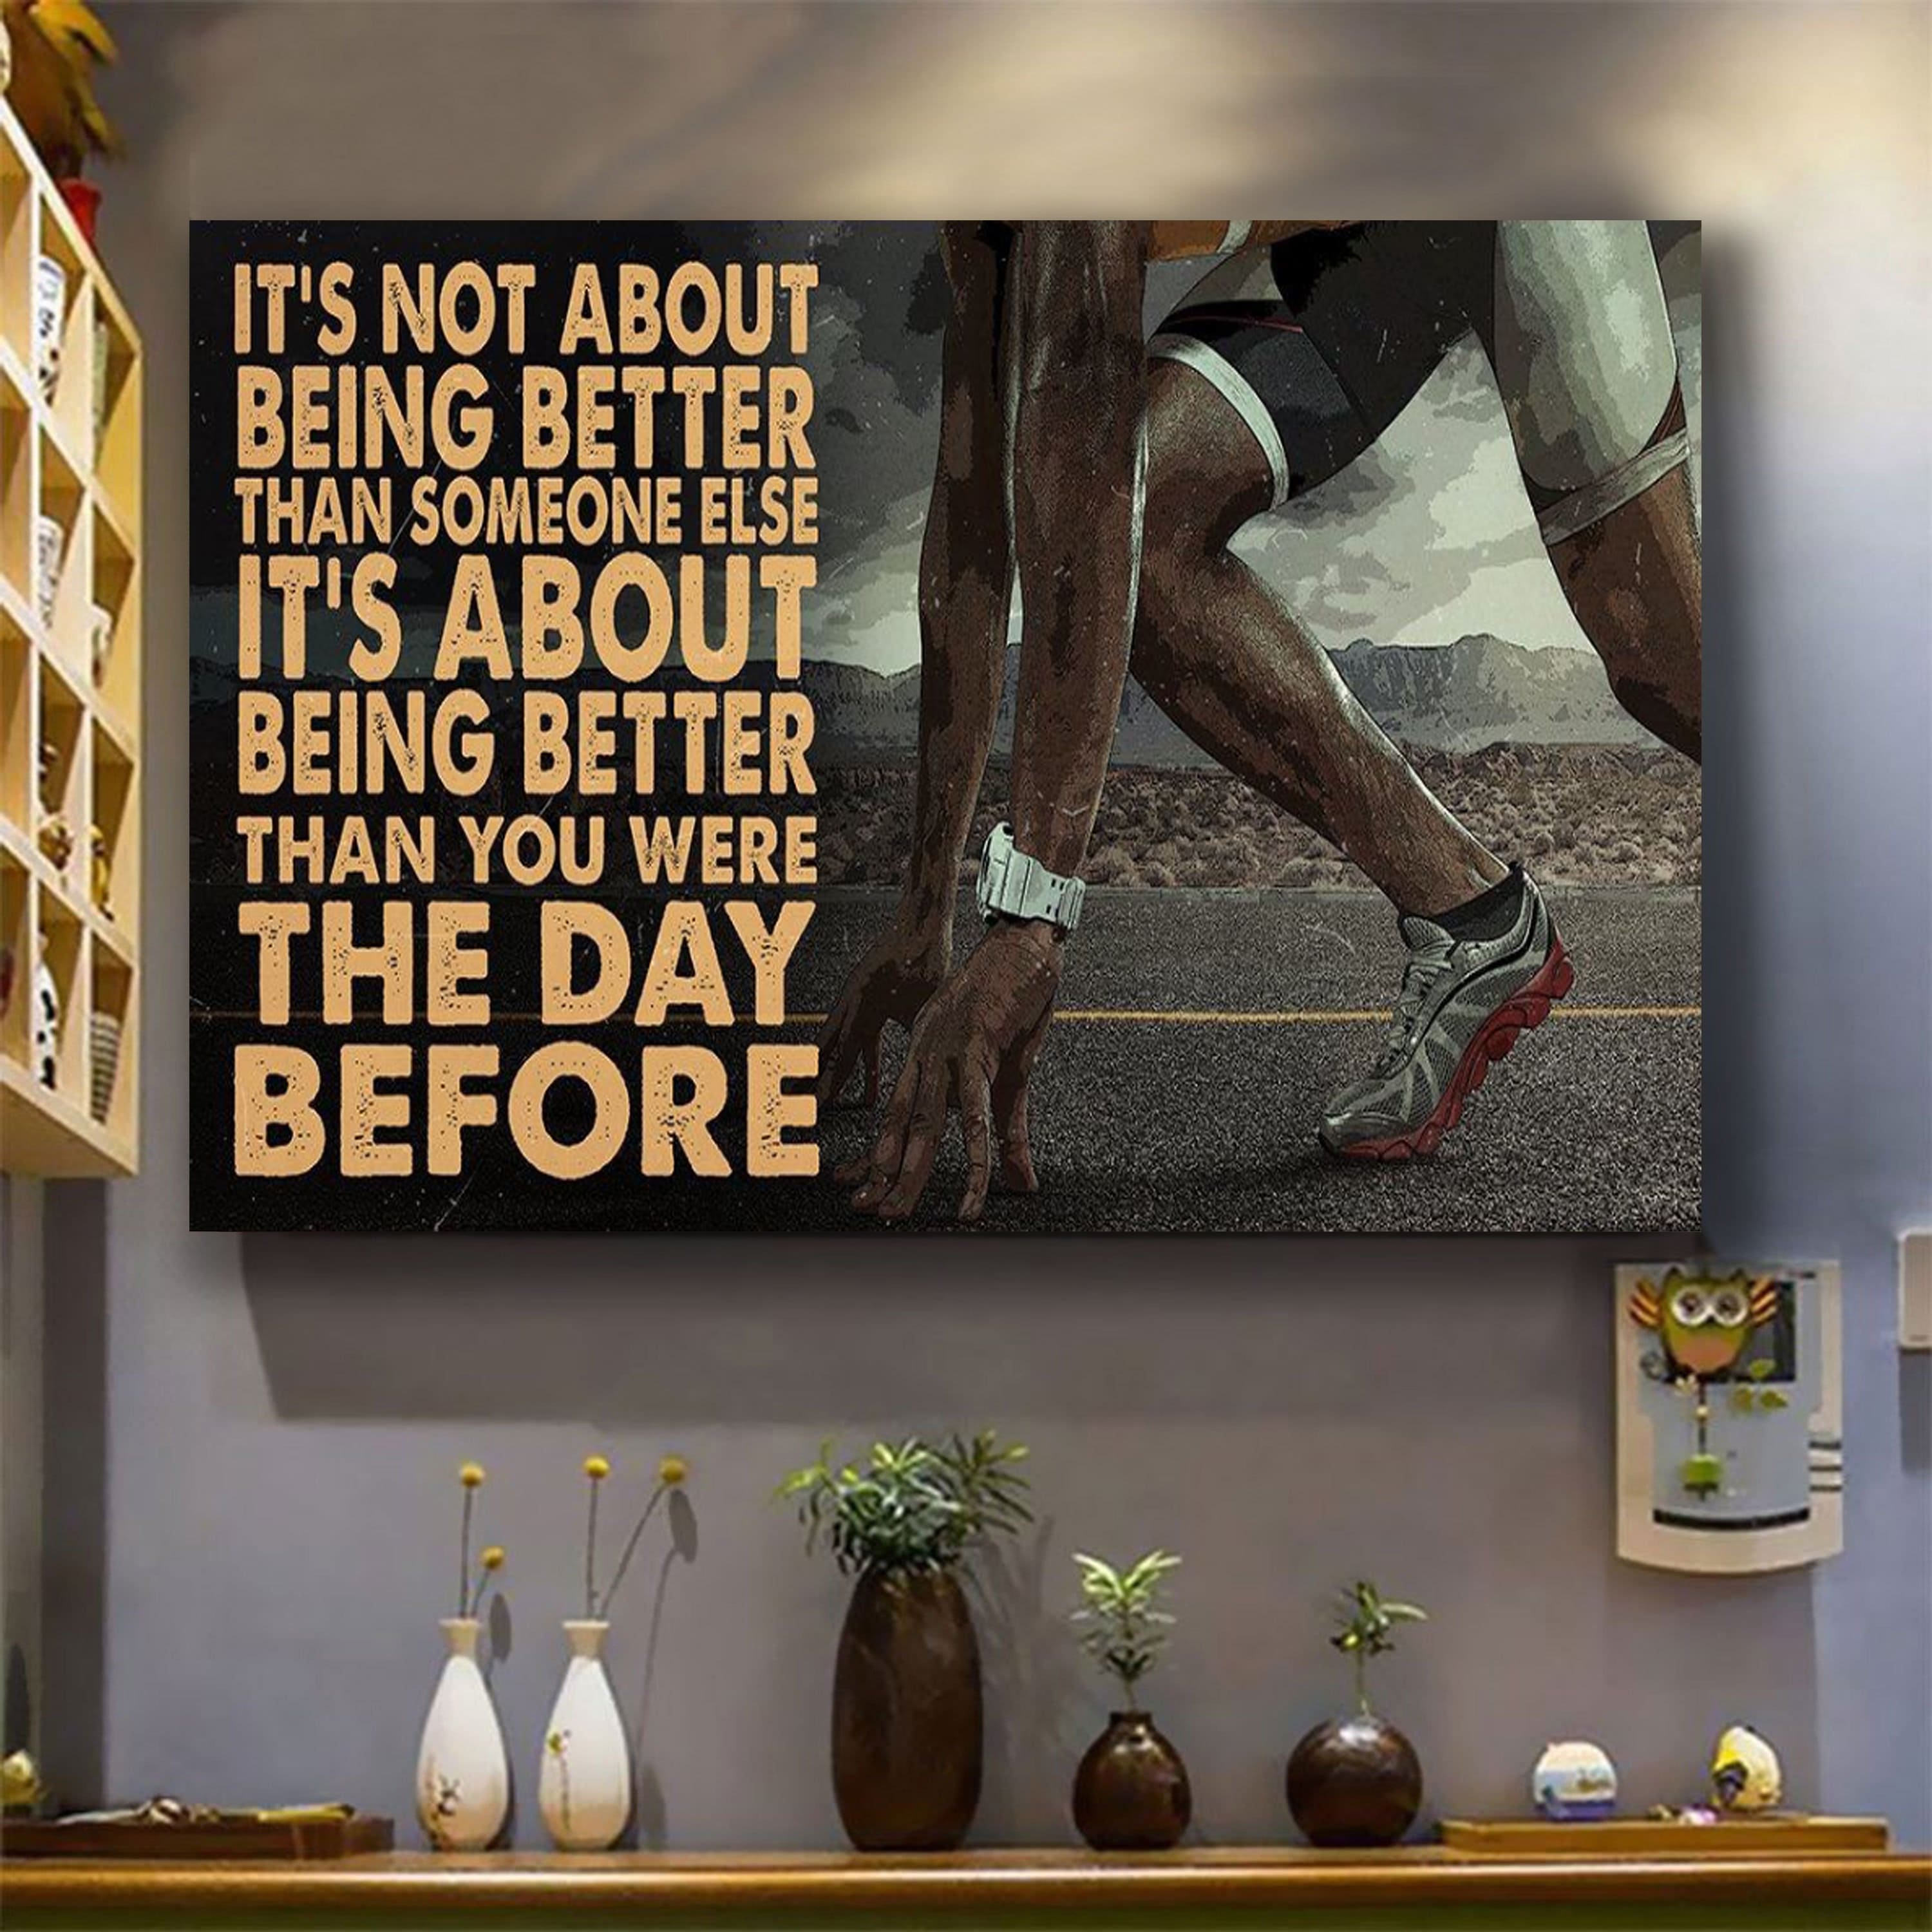 Gymnastics customizable poster canvas - It is not about better than someone else, It is about being better than you were the day before